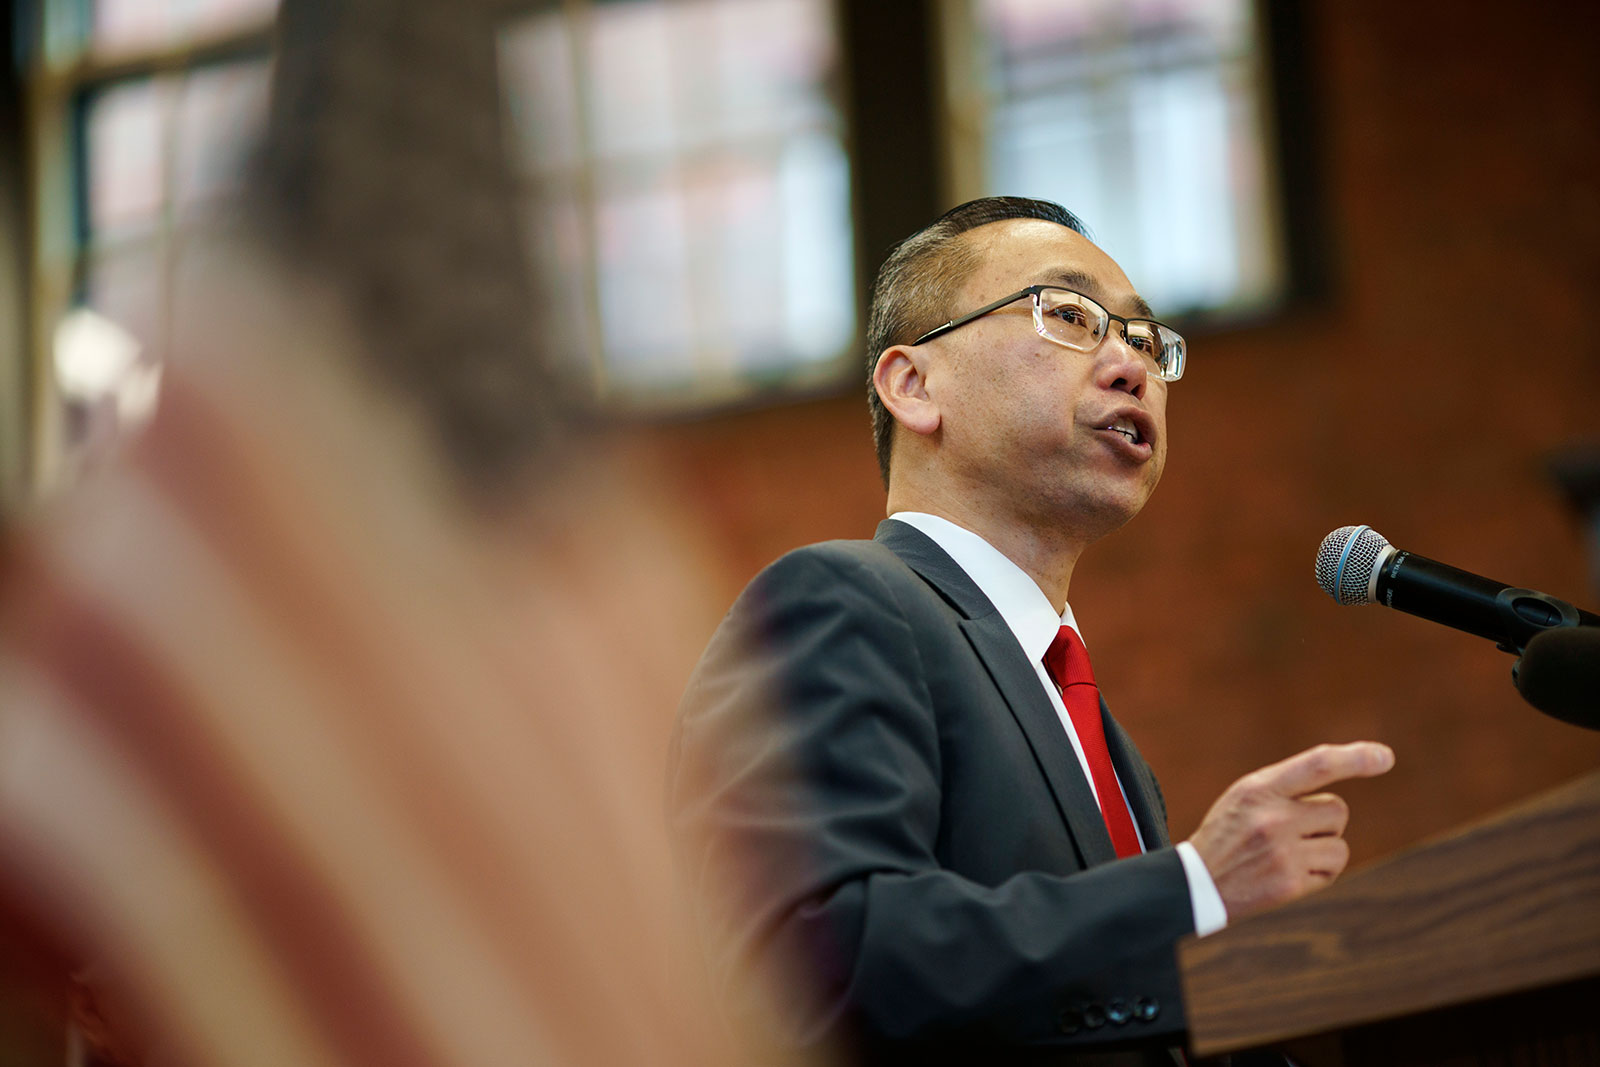 Allan Fung speaks at his campaign kickoff event on April 26 in East Greenwich, Rhode Island.